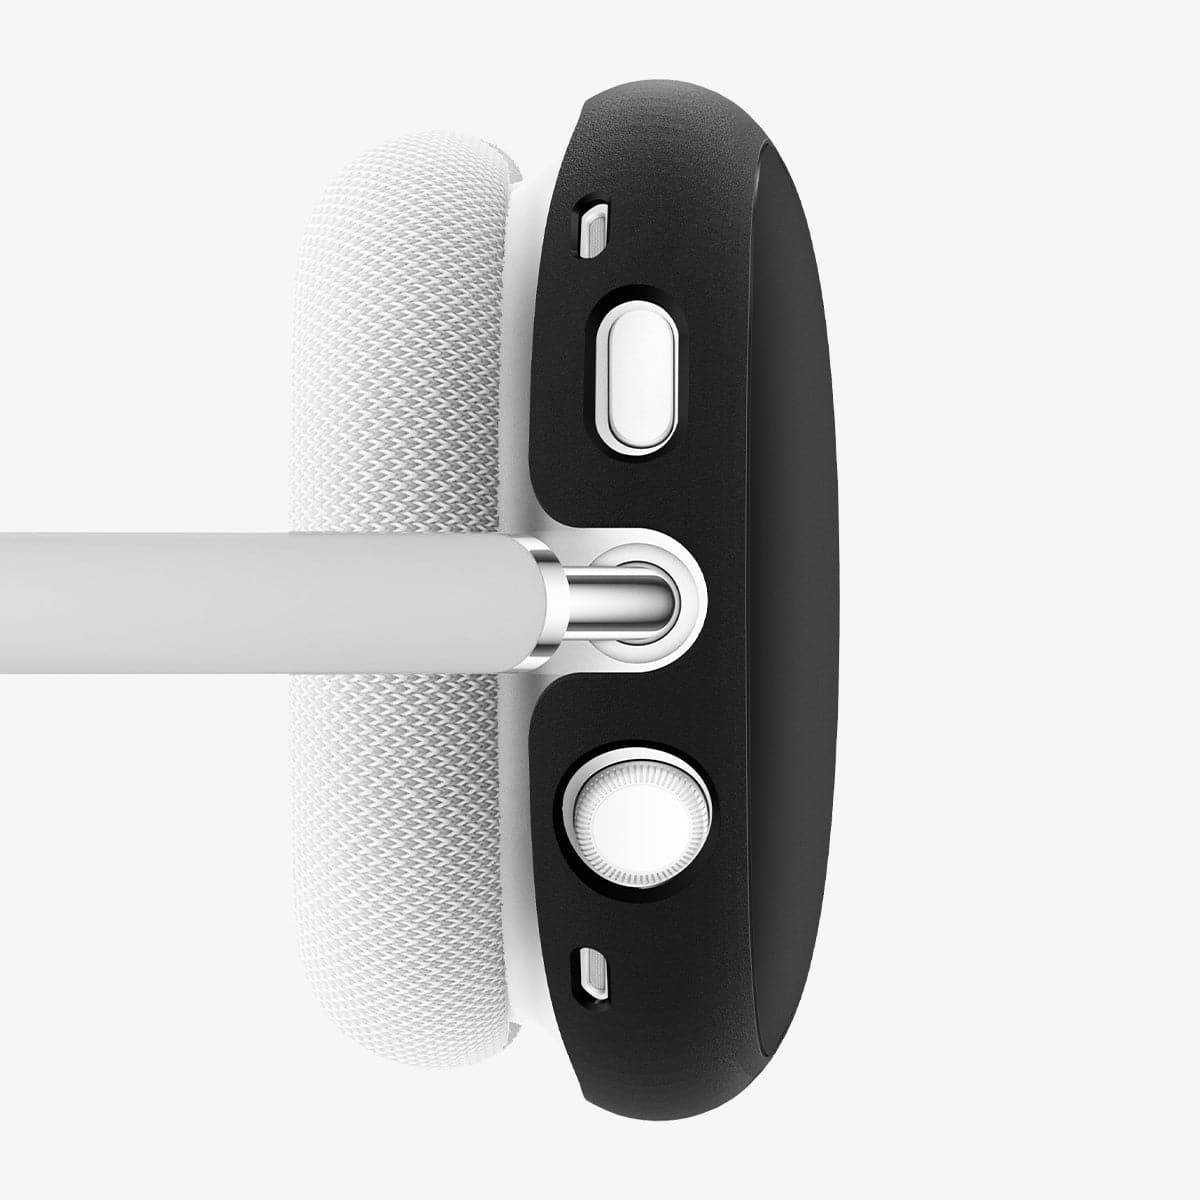 ASD02811 - AirPods Max Case Silicone Fit in black showing the top with precise cutouts for buttons